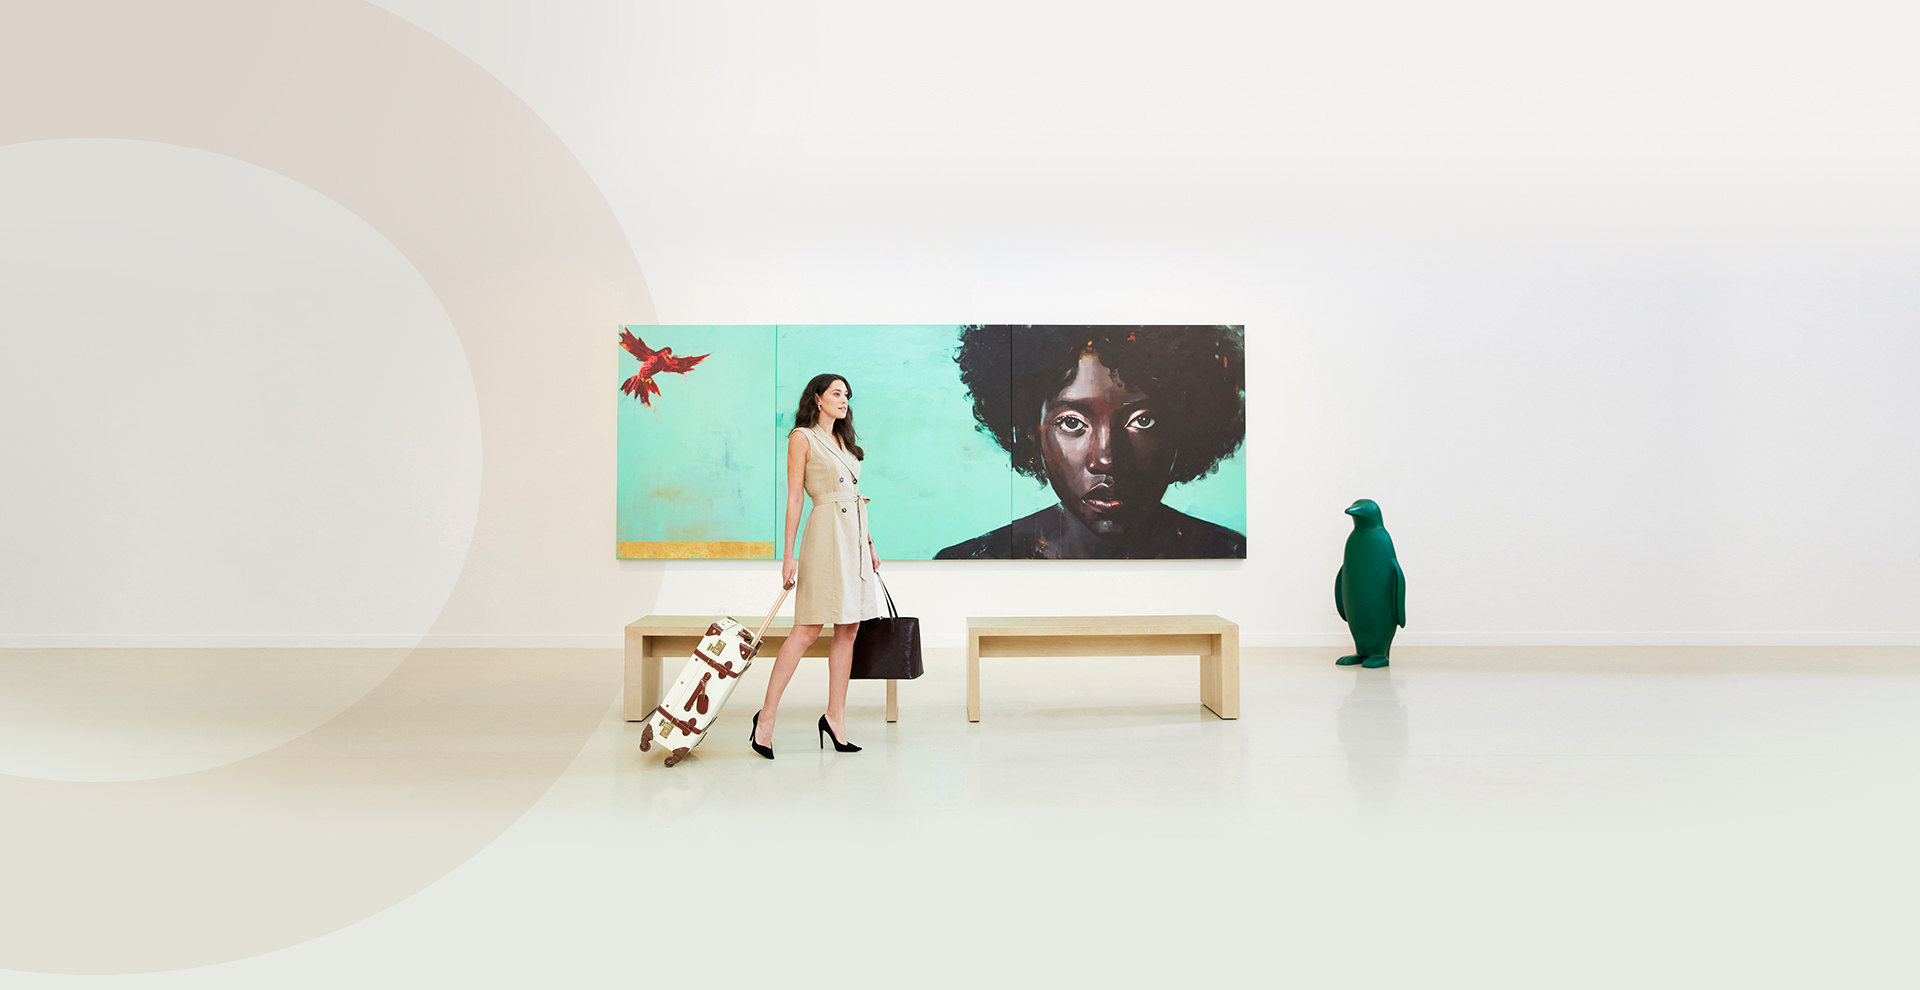 woman walking with suitcase in front of large artpiece and green penguin